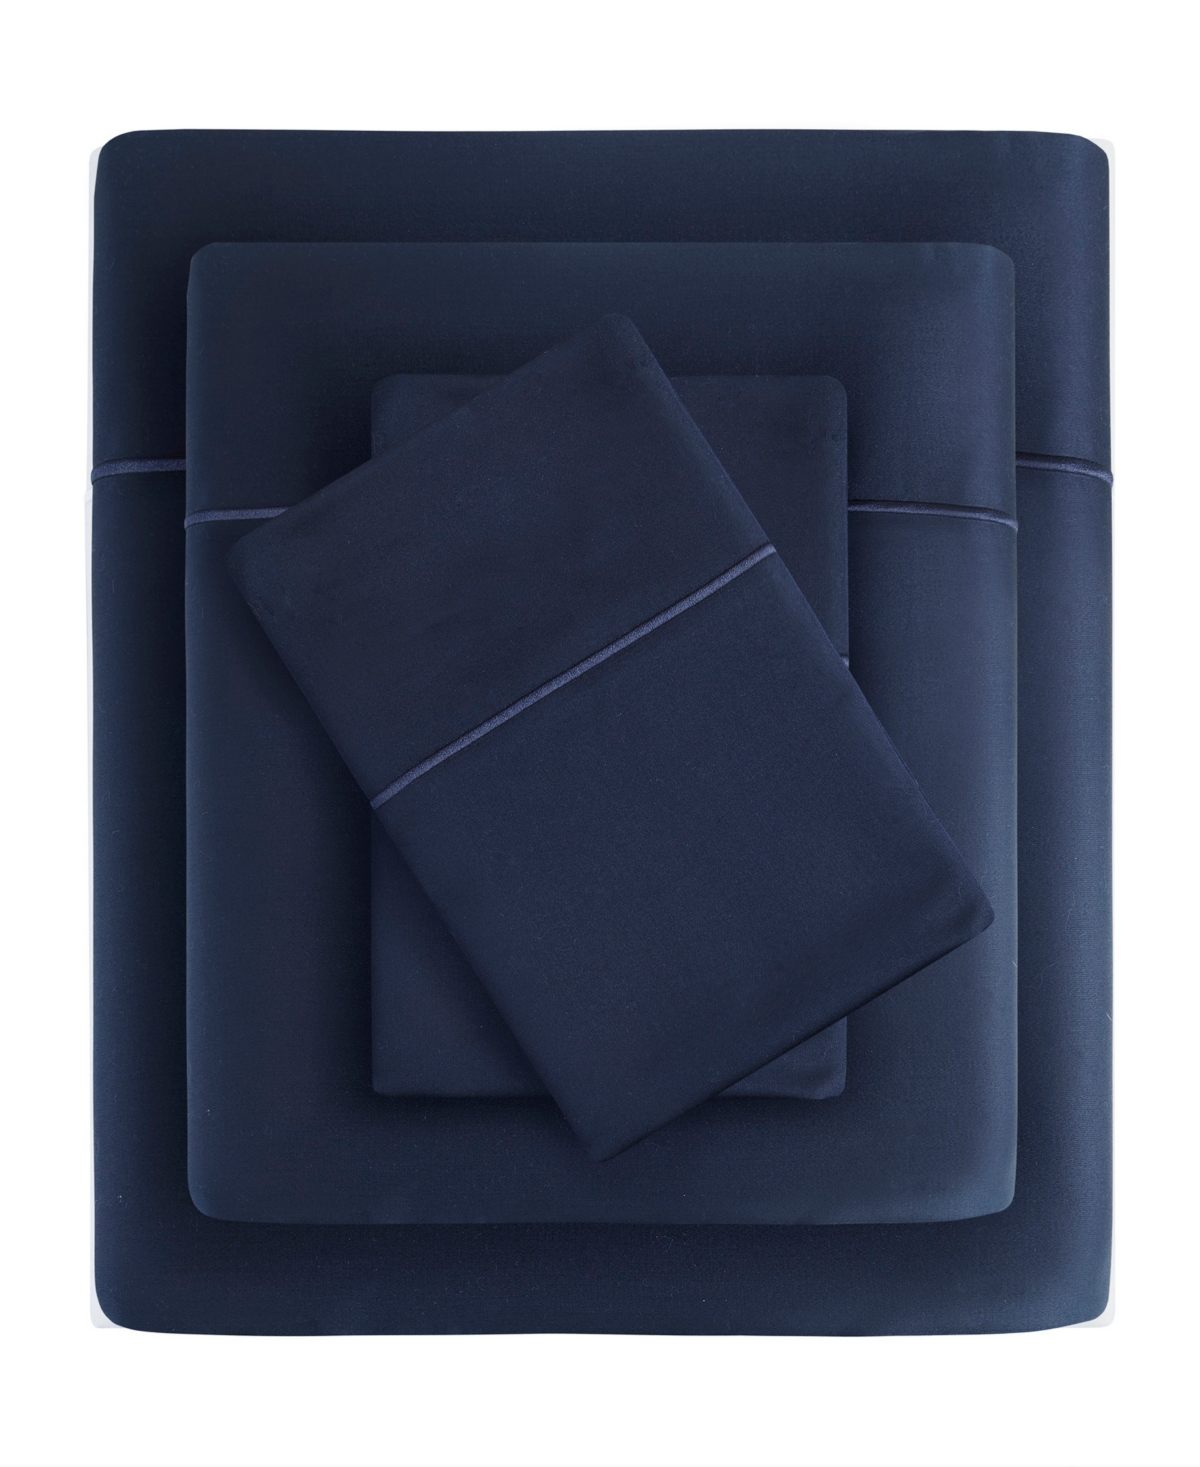 Madison Park 600 Thread Count Pima Cotton Sateen 4-pc Sheet Set, Queen In Navy